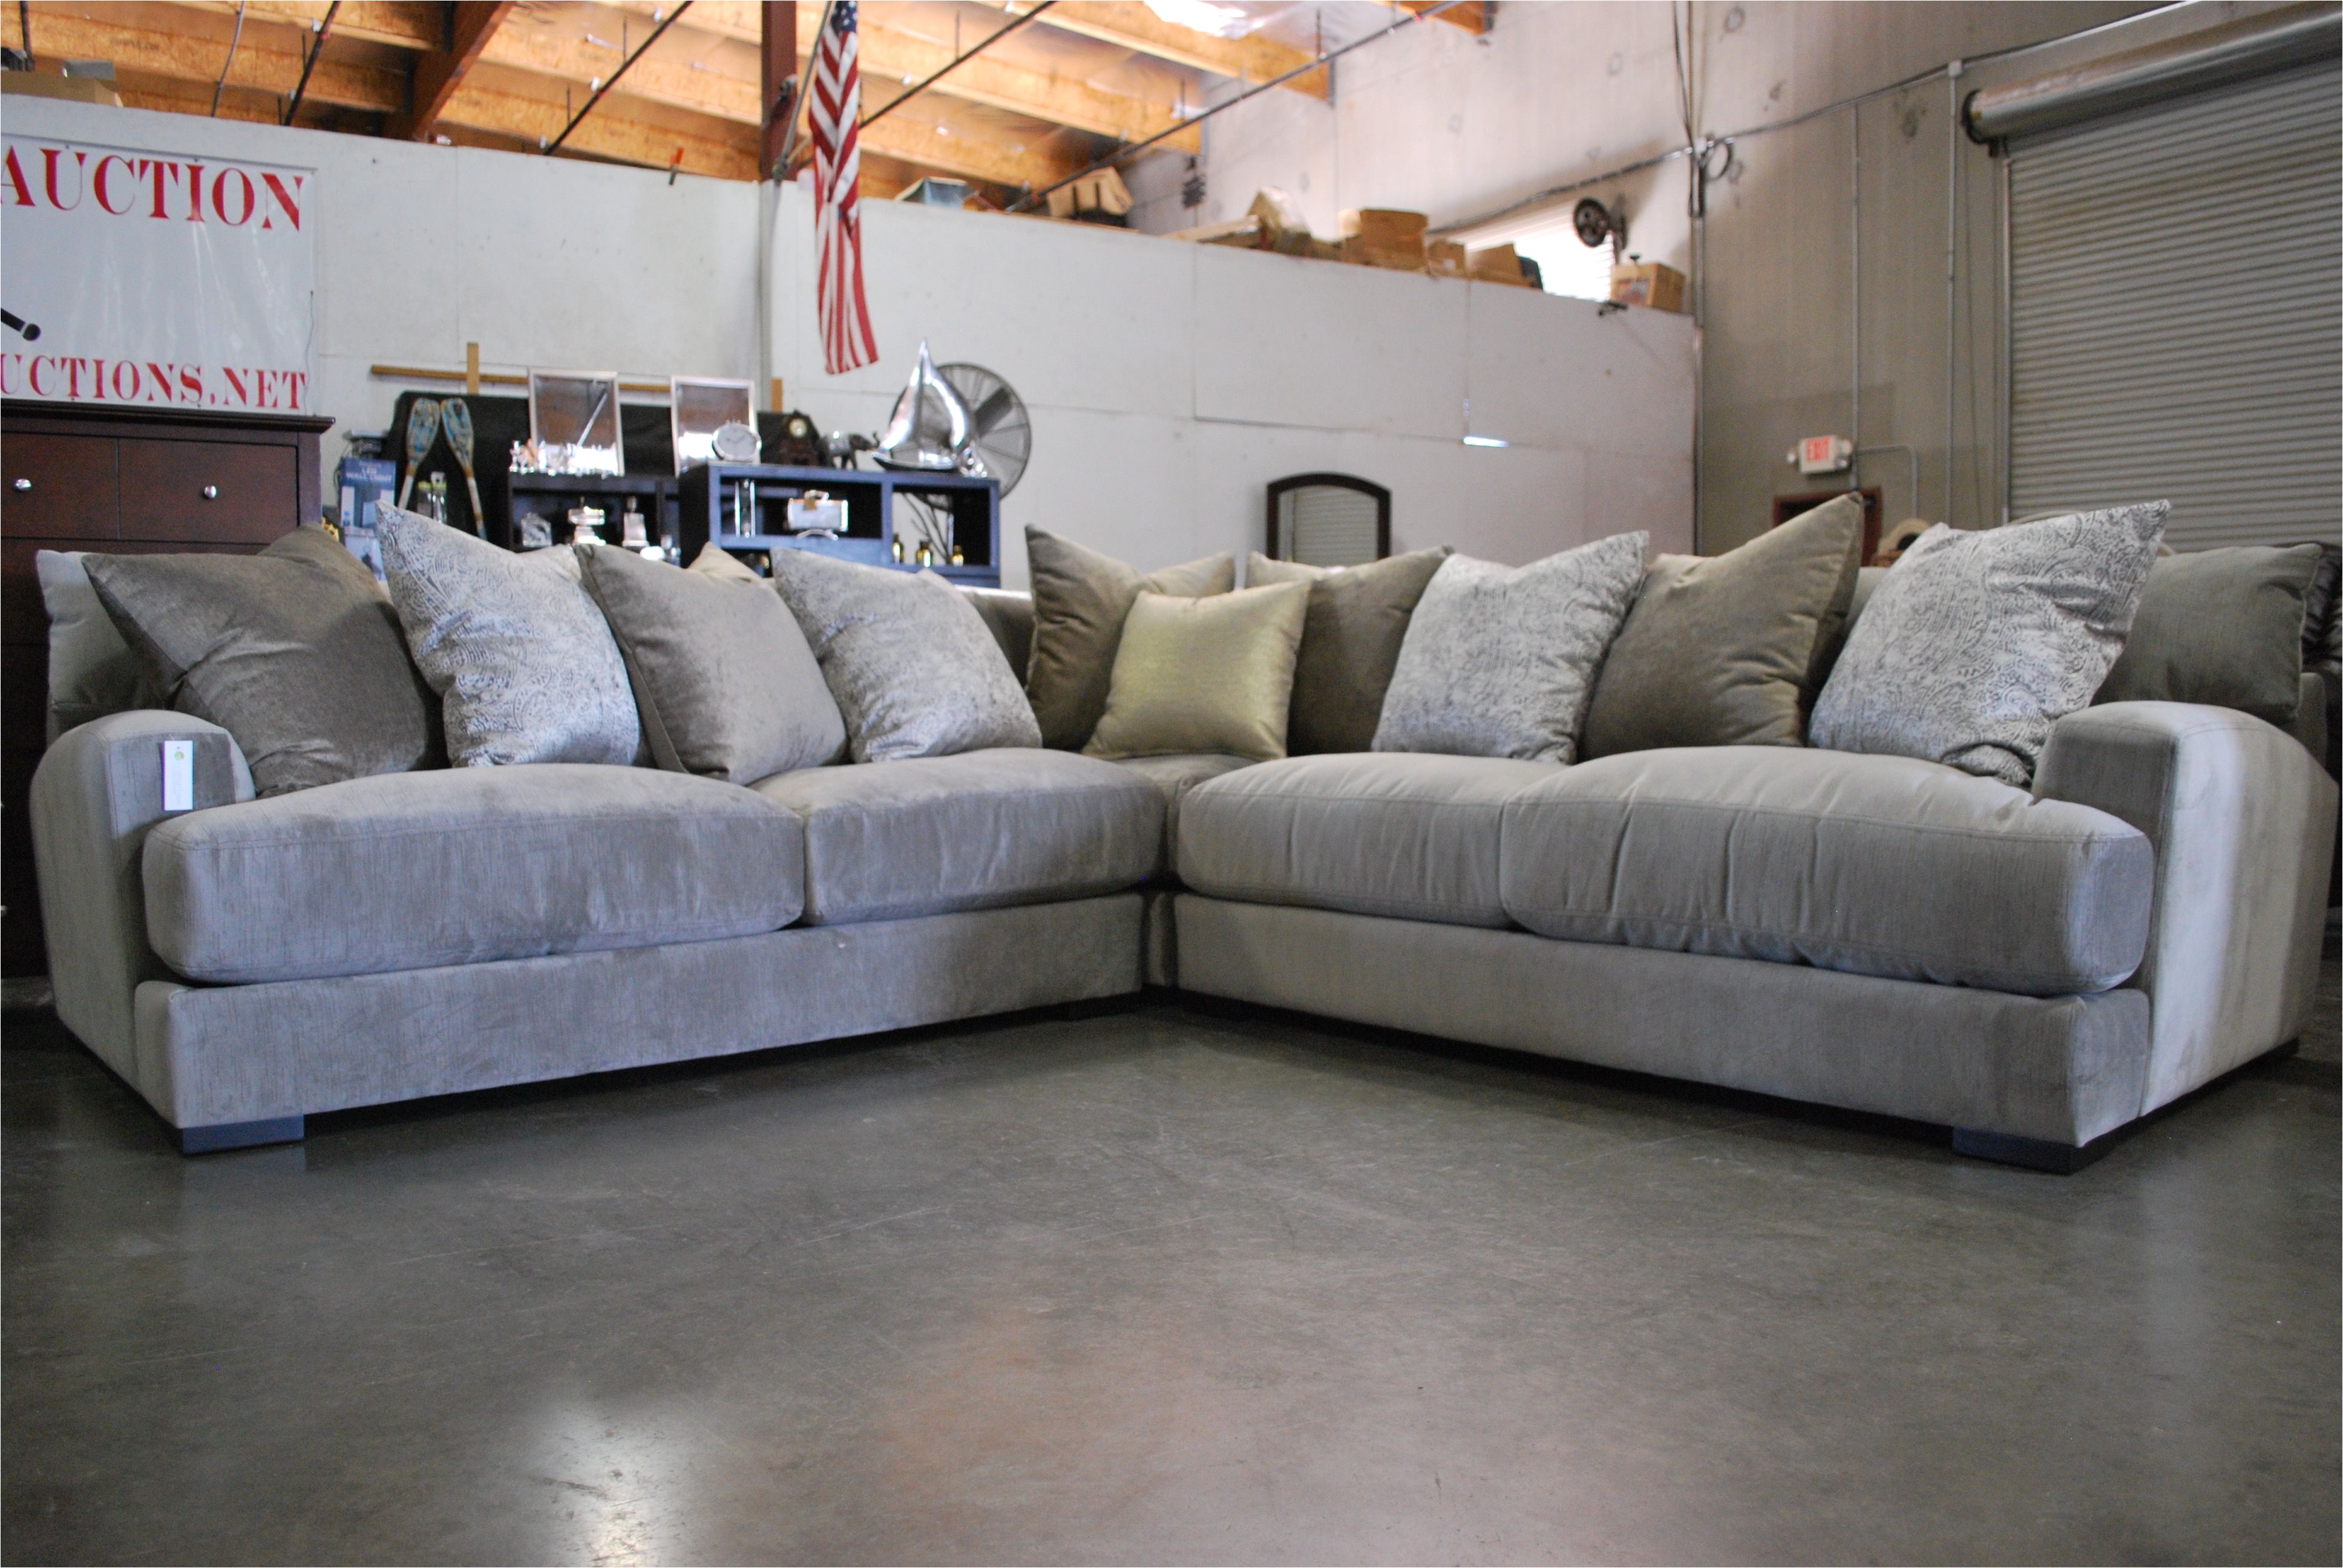 Jonathan Lewis Furniture Another Gorgeous Jonathan Louis Sectional that You Just Melt Into